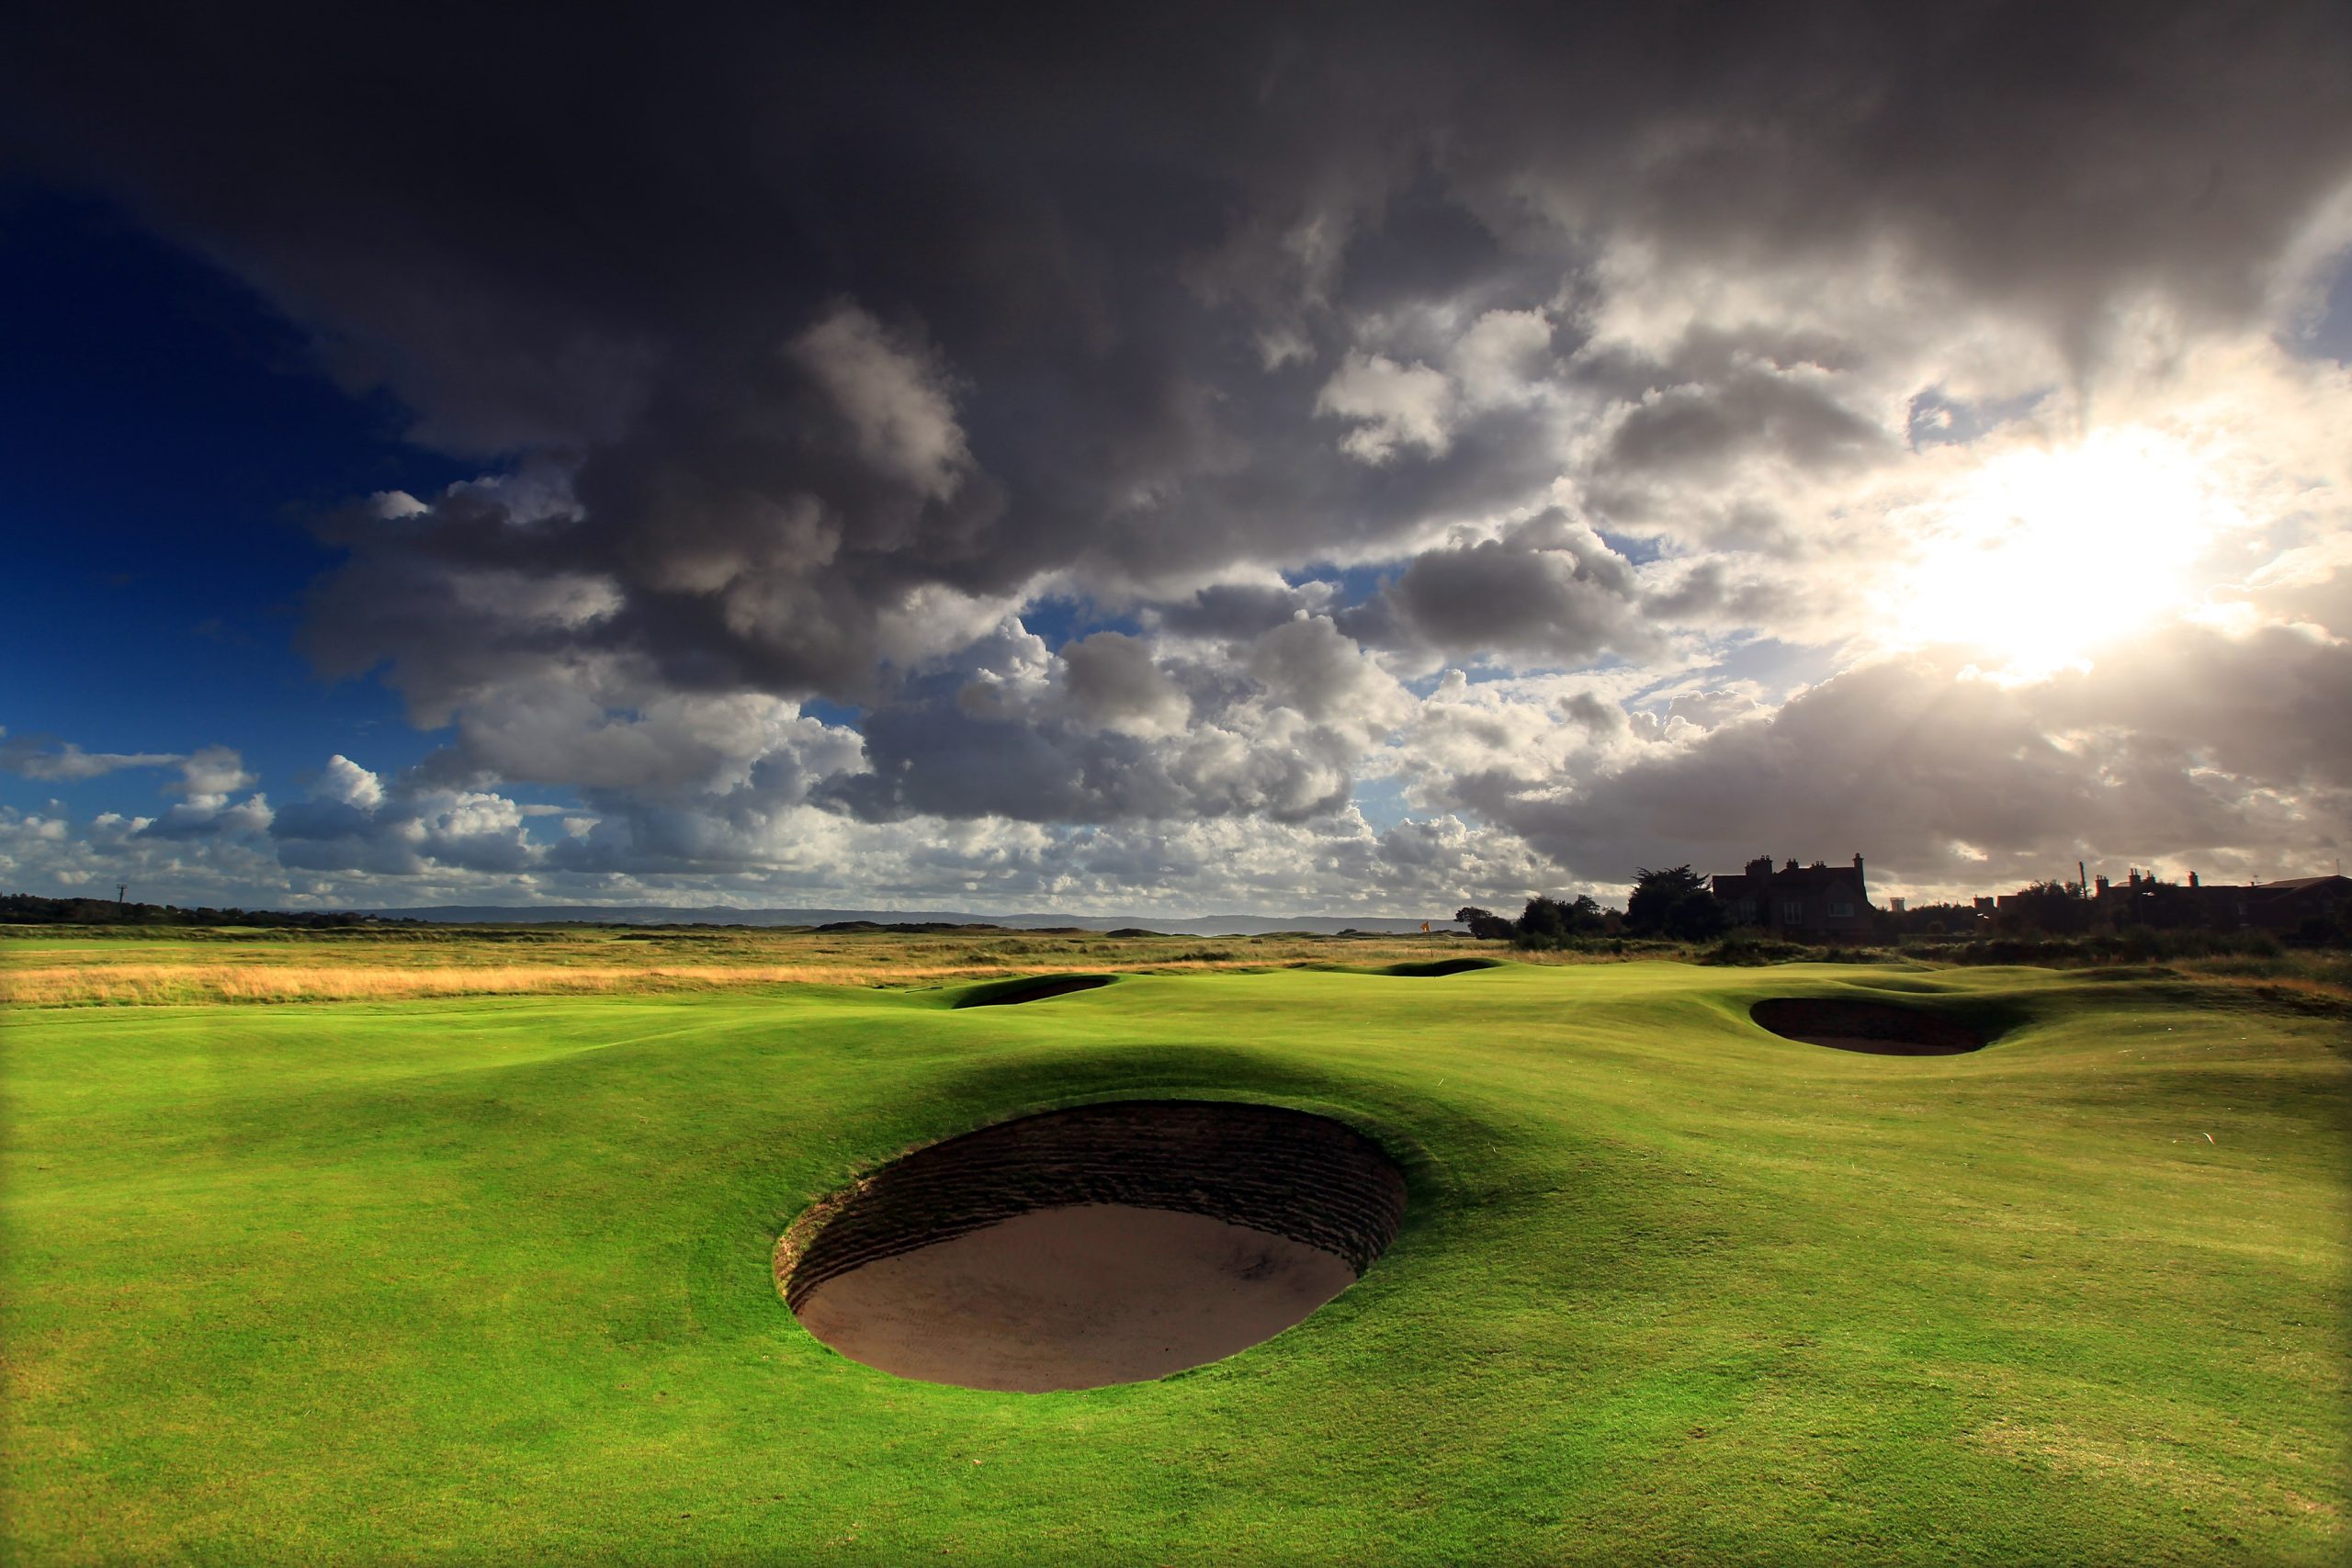 Dramatic low sunlight cutting through the dark clouds over Royal Liverpool Golf Club